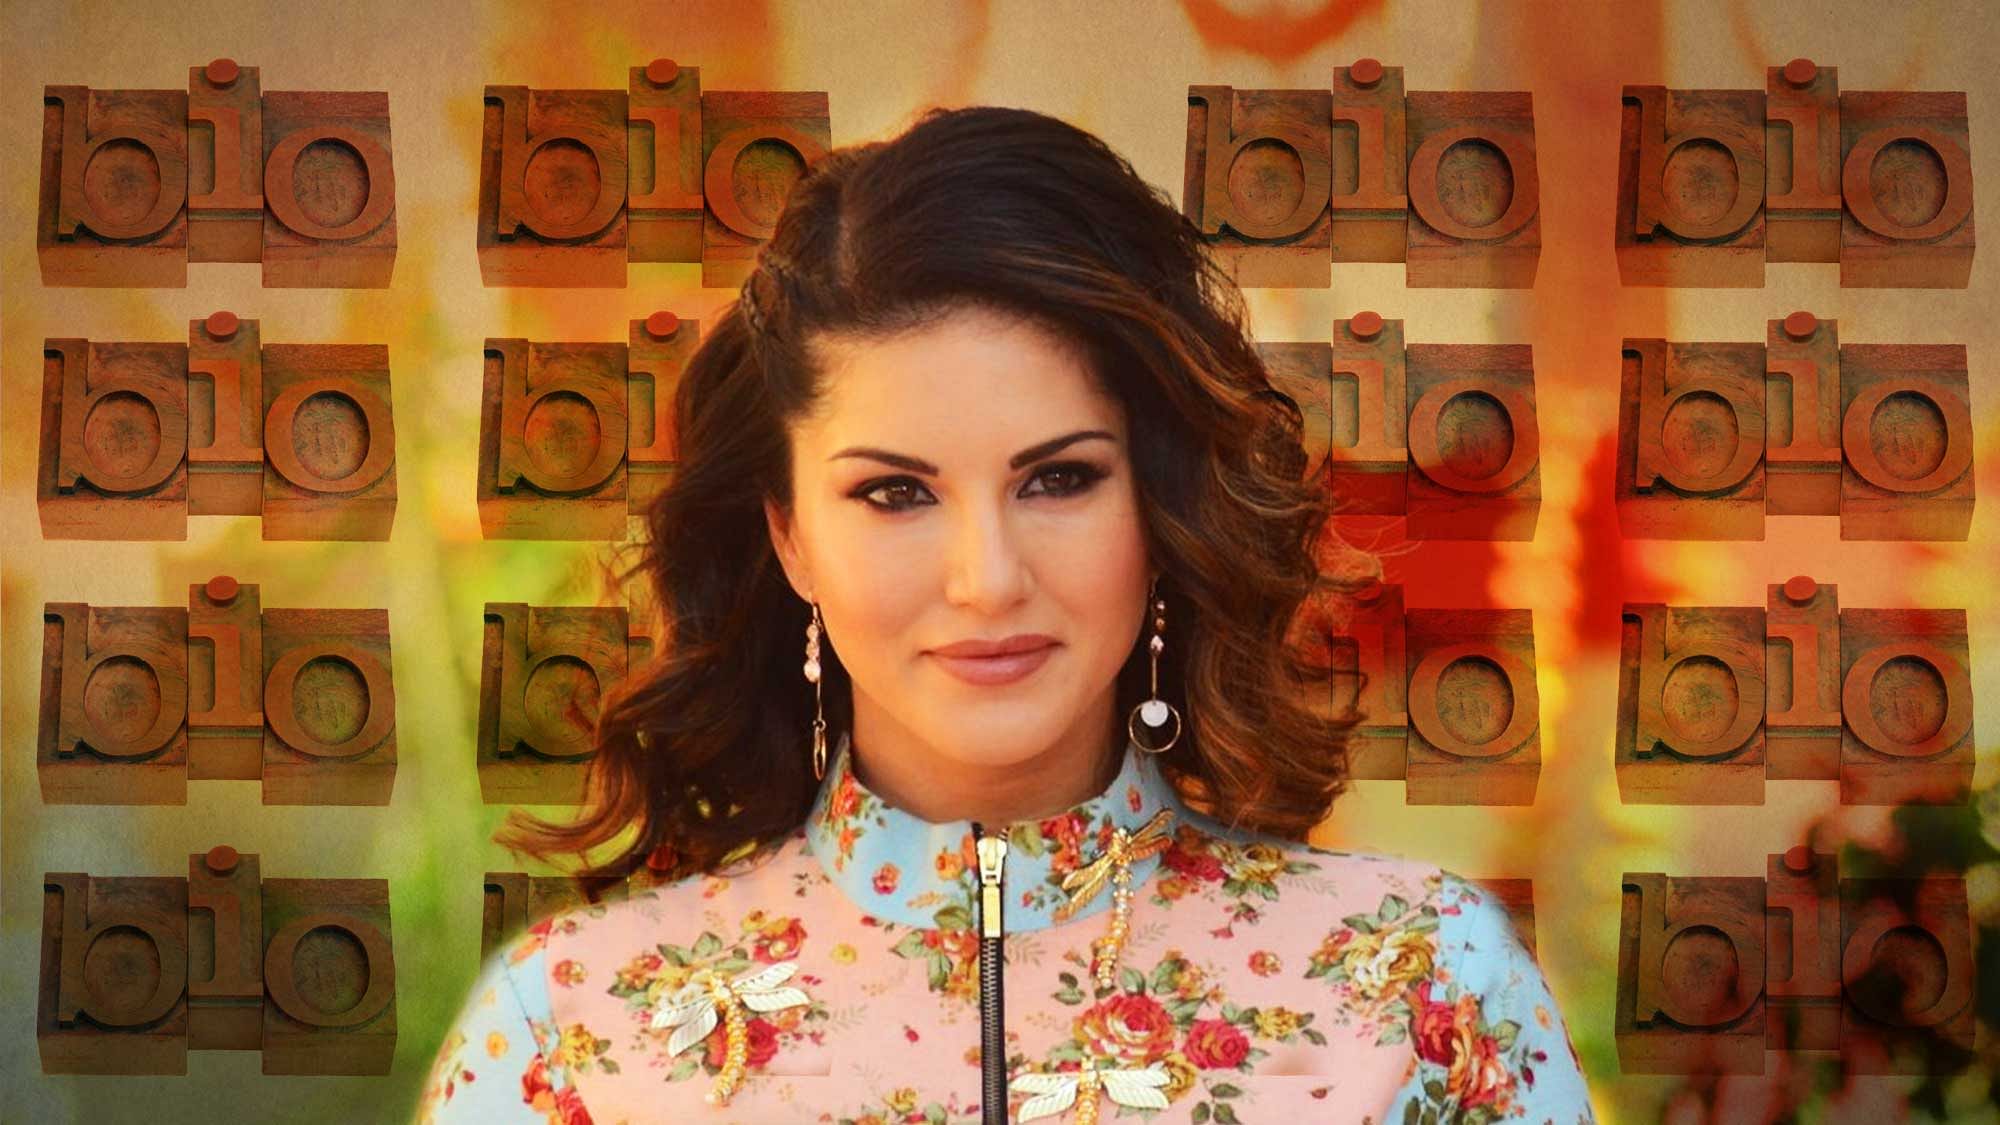 If grapevine is to be believed, a Sunny Leone biography is in progress. (Photo: The Quint)